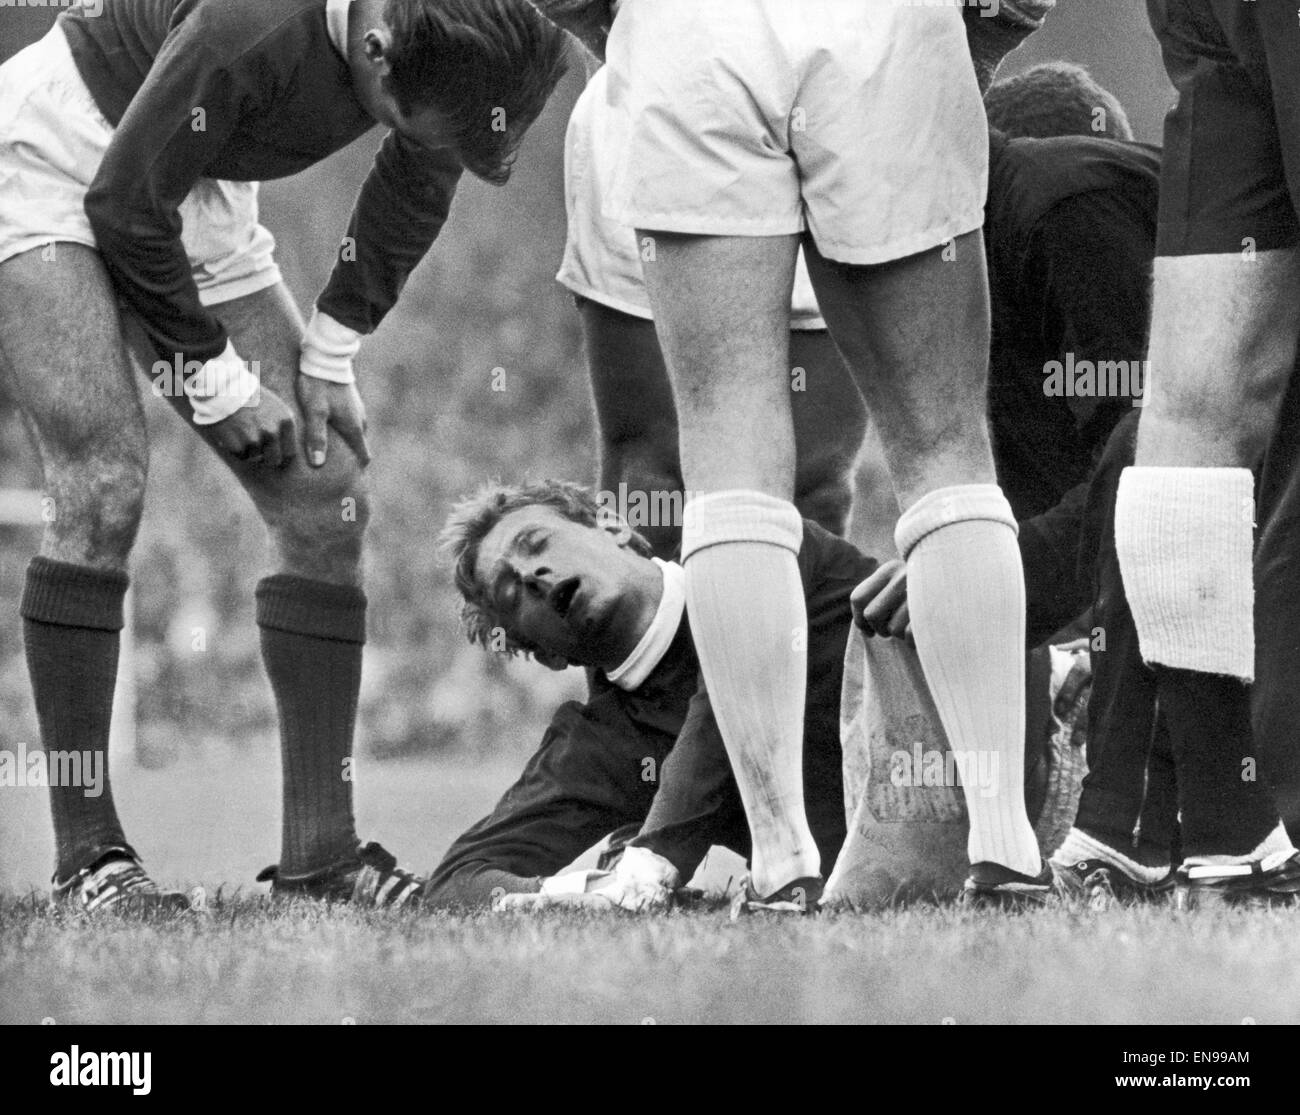 English League Division One match at Old Trafford. Manchester United 1 v Sunderland 0. Denis Law of United lies on the ground after a collision with Charlie Hurley at Old Trafford. 10th October 1964. Stock Photo